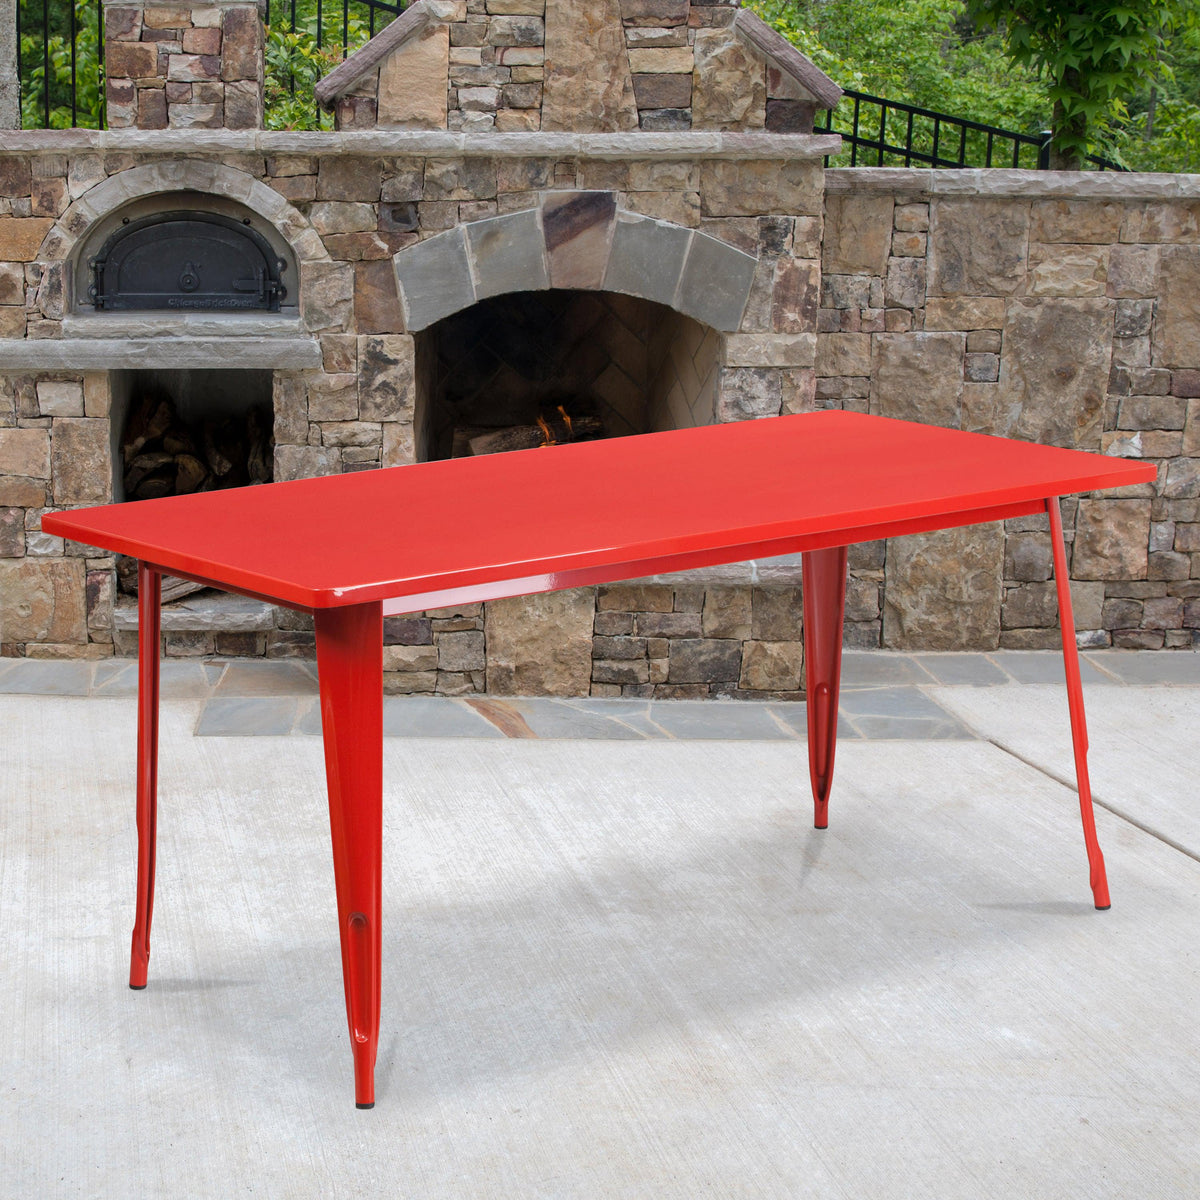 Red |#| 31.5inch x 63inch Rectangular Red Metal Indoor-Outdoor Table - Industrial Table